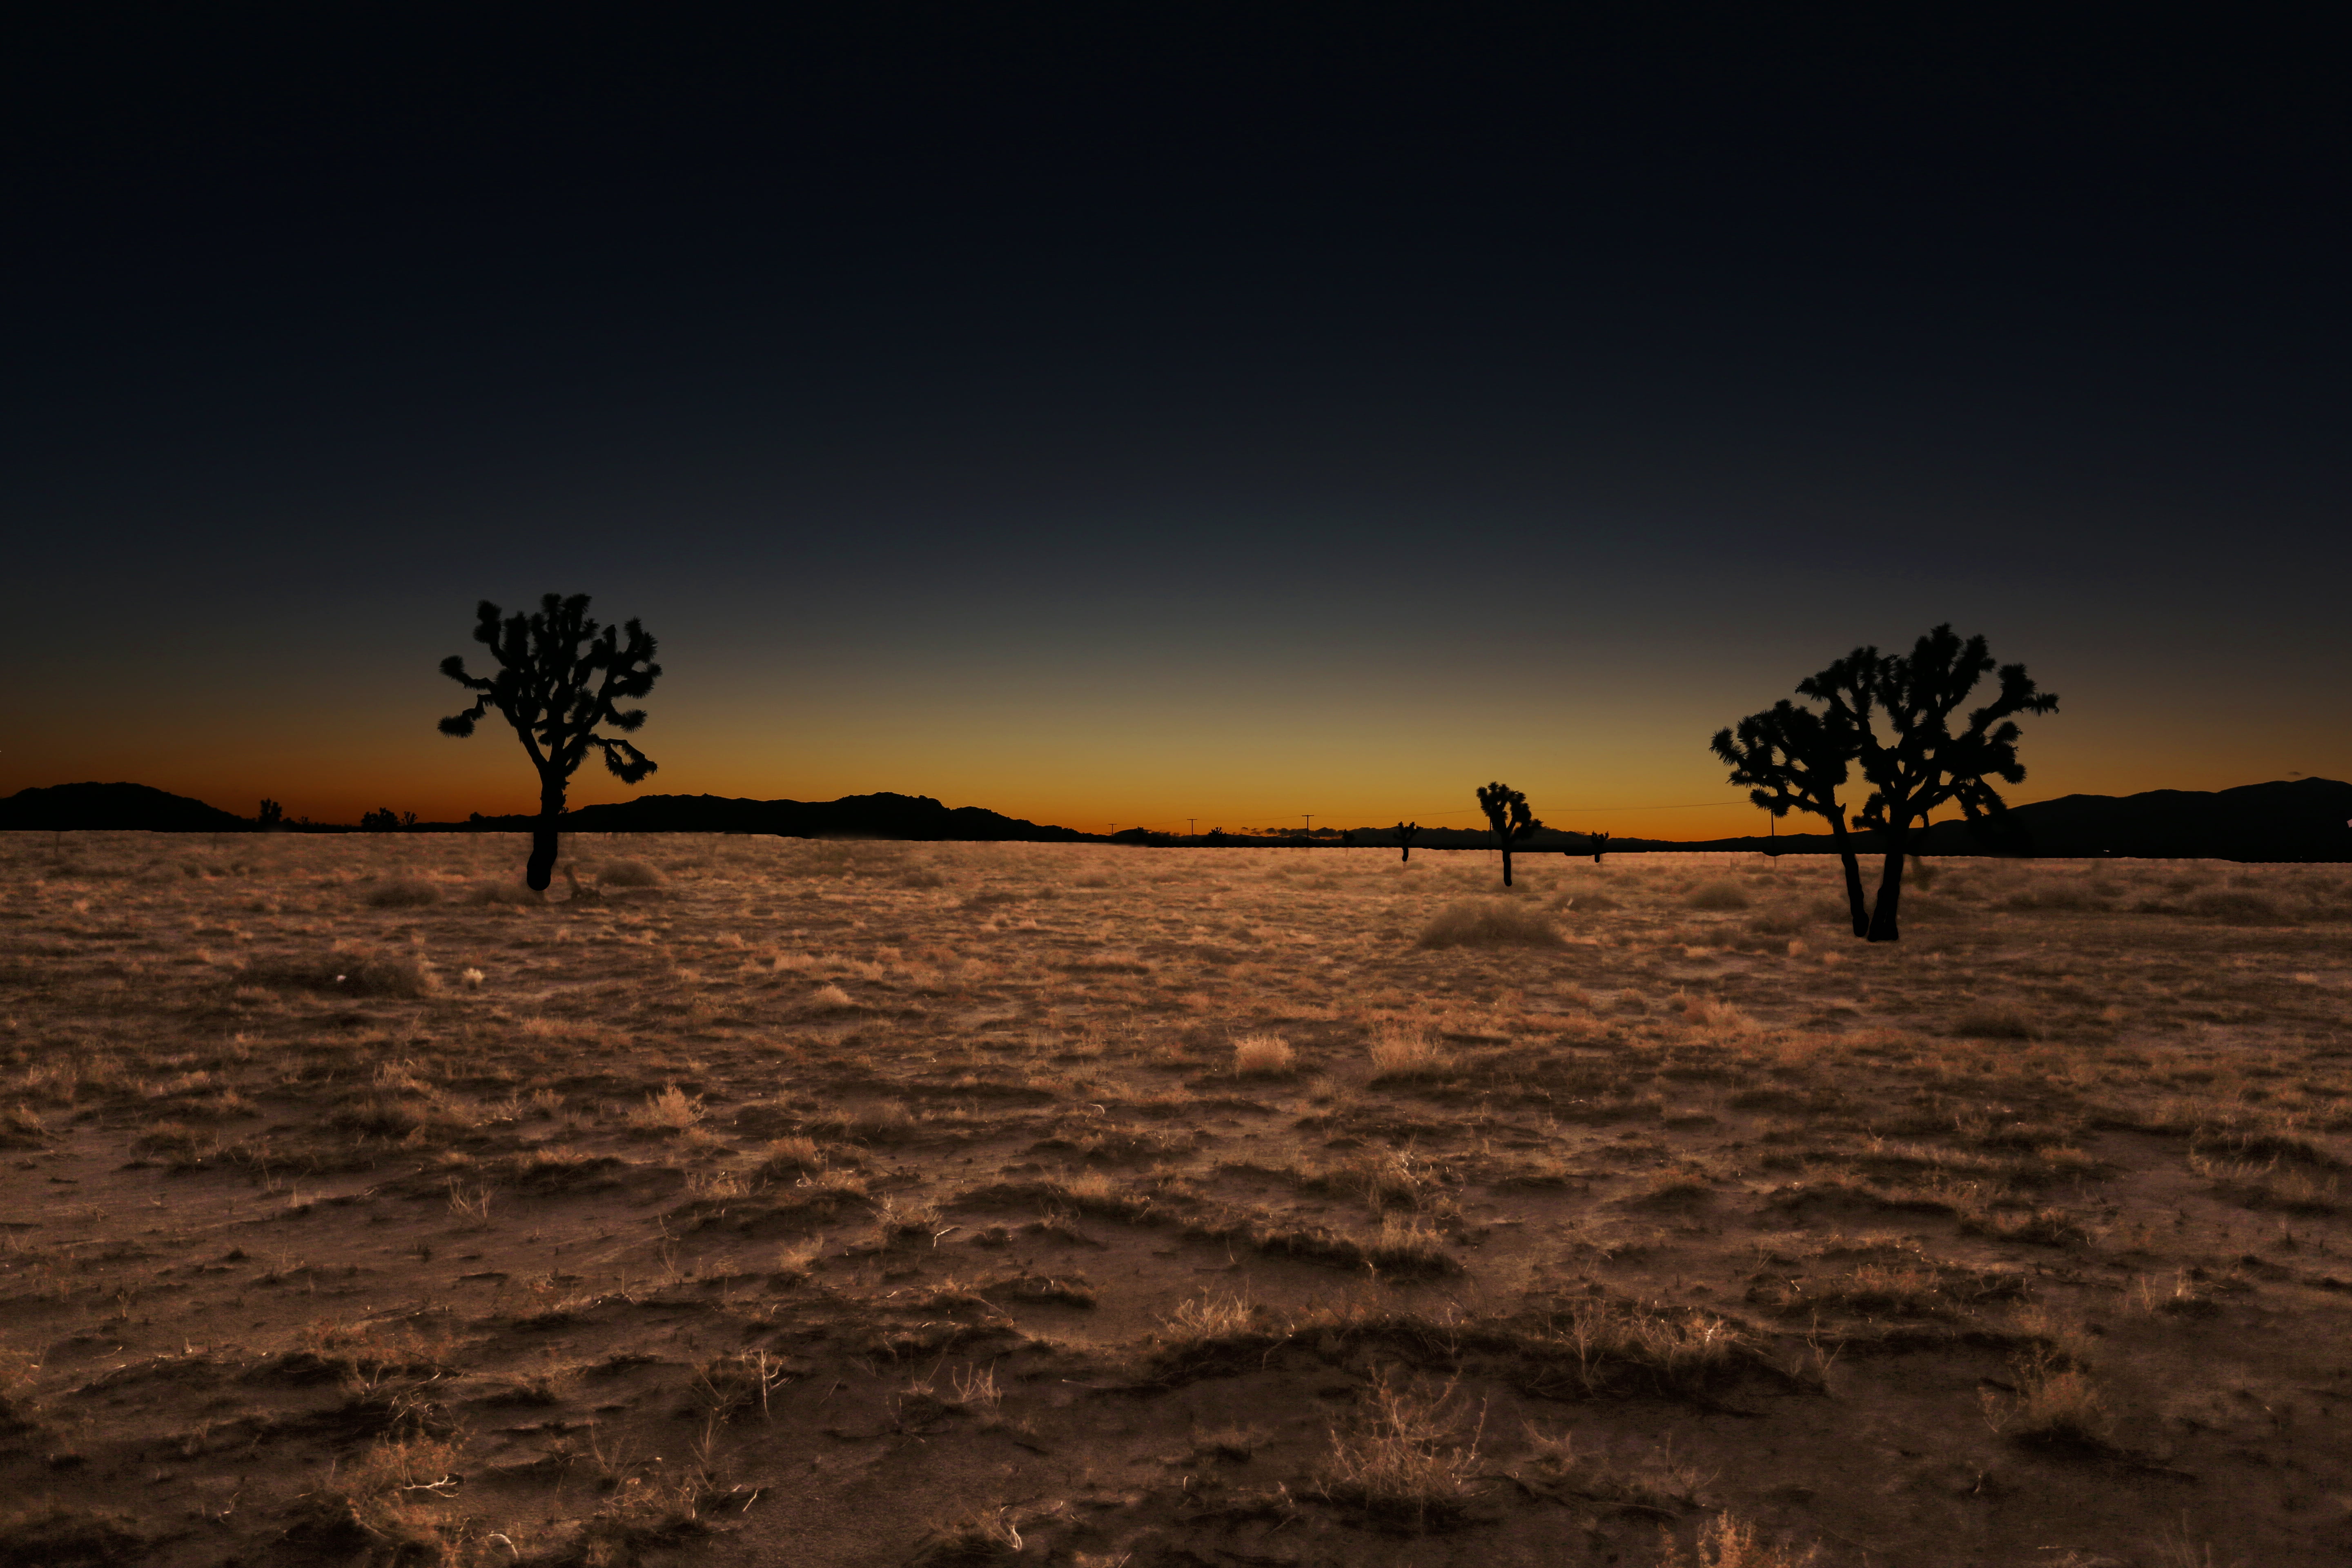 silhouette of trees over dirt ground with dried grass under dark